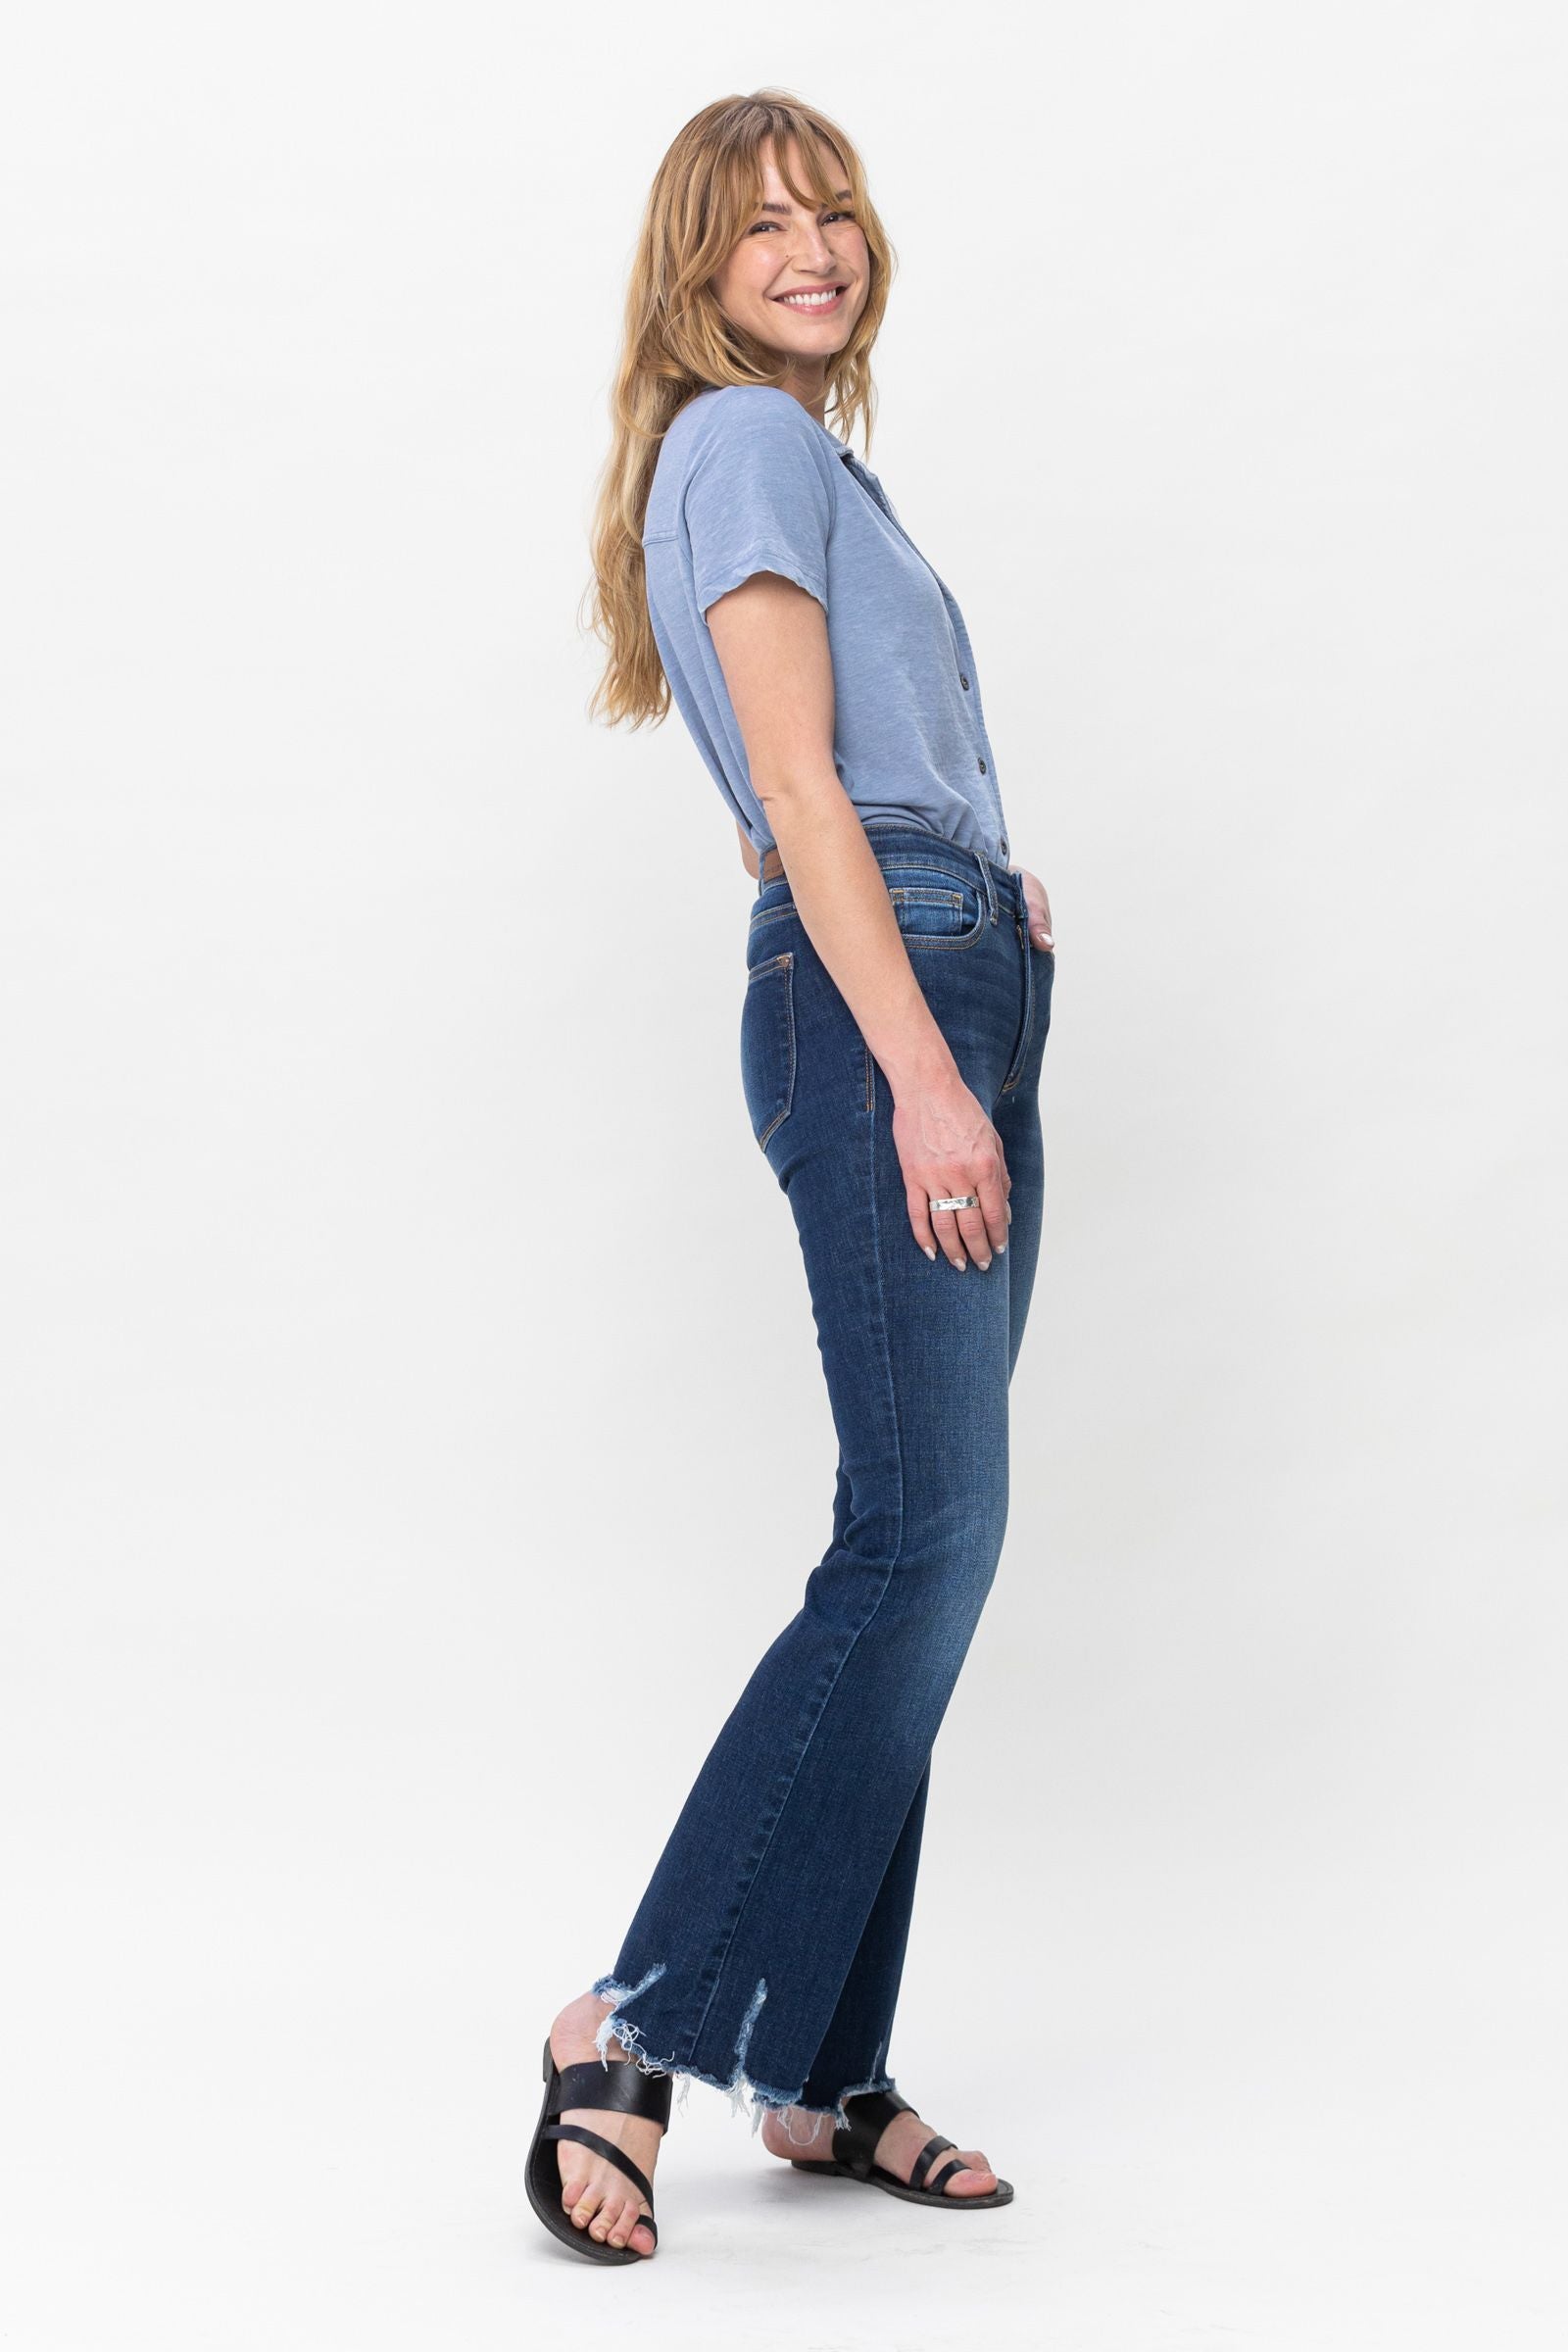 Tiffany Cagle Boutique - Judy Blue Plus Size Bootcut Jeans - 14 to 24W